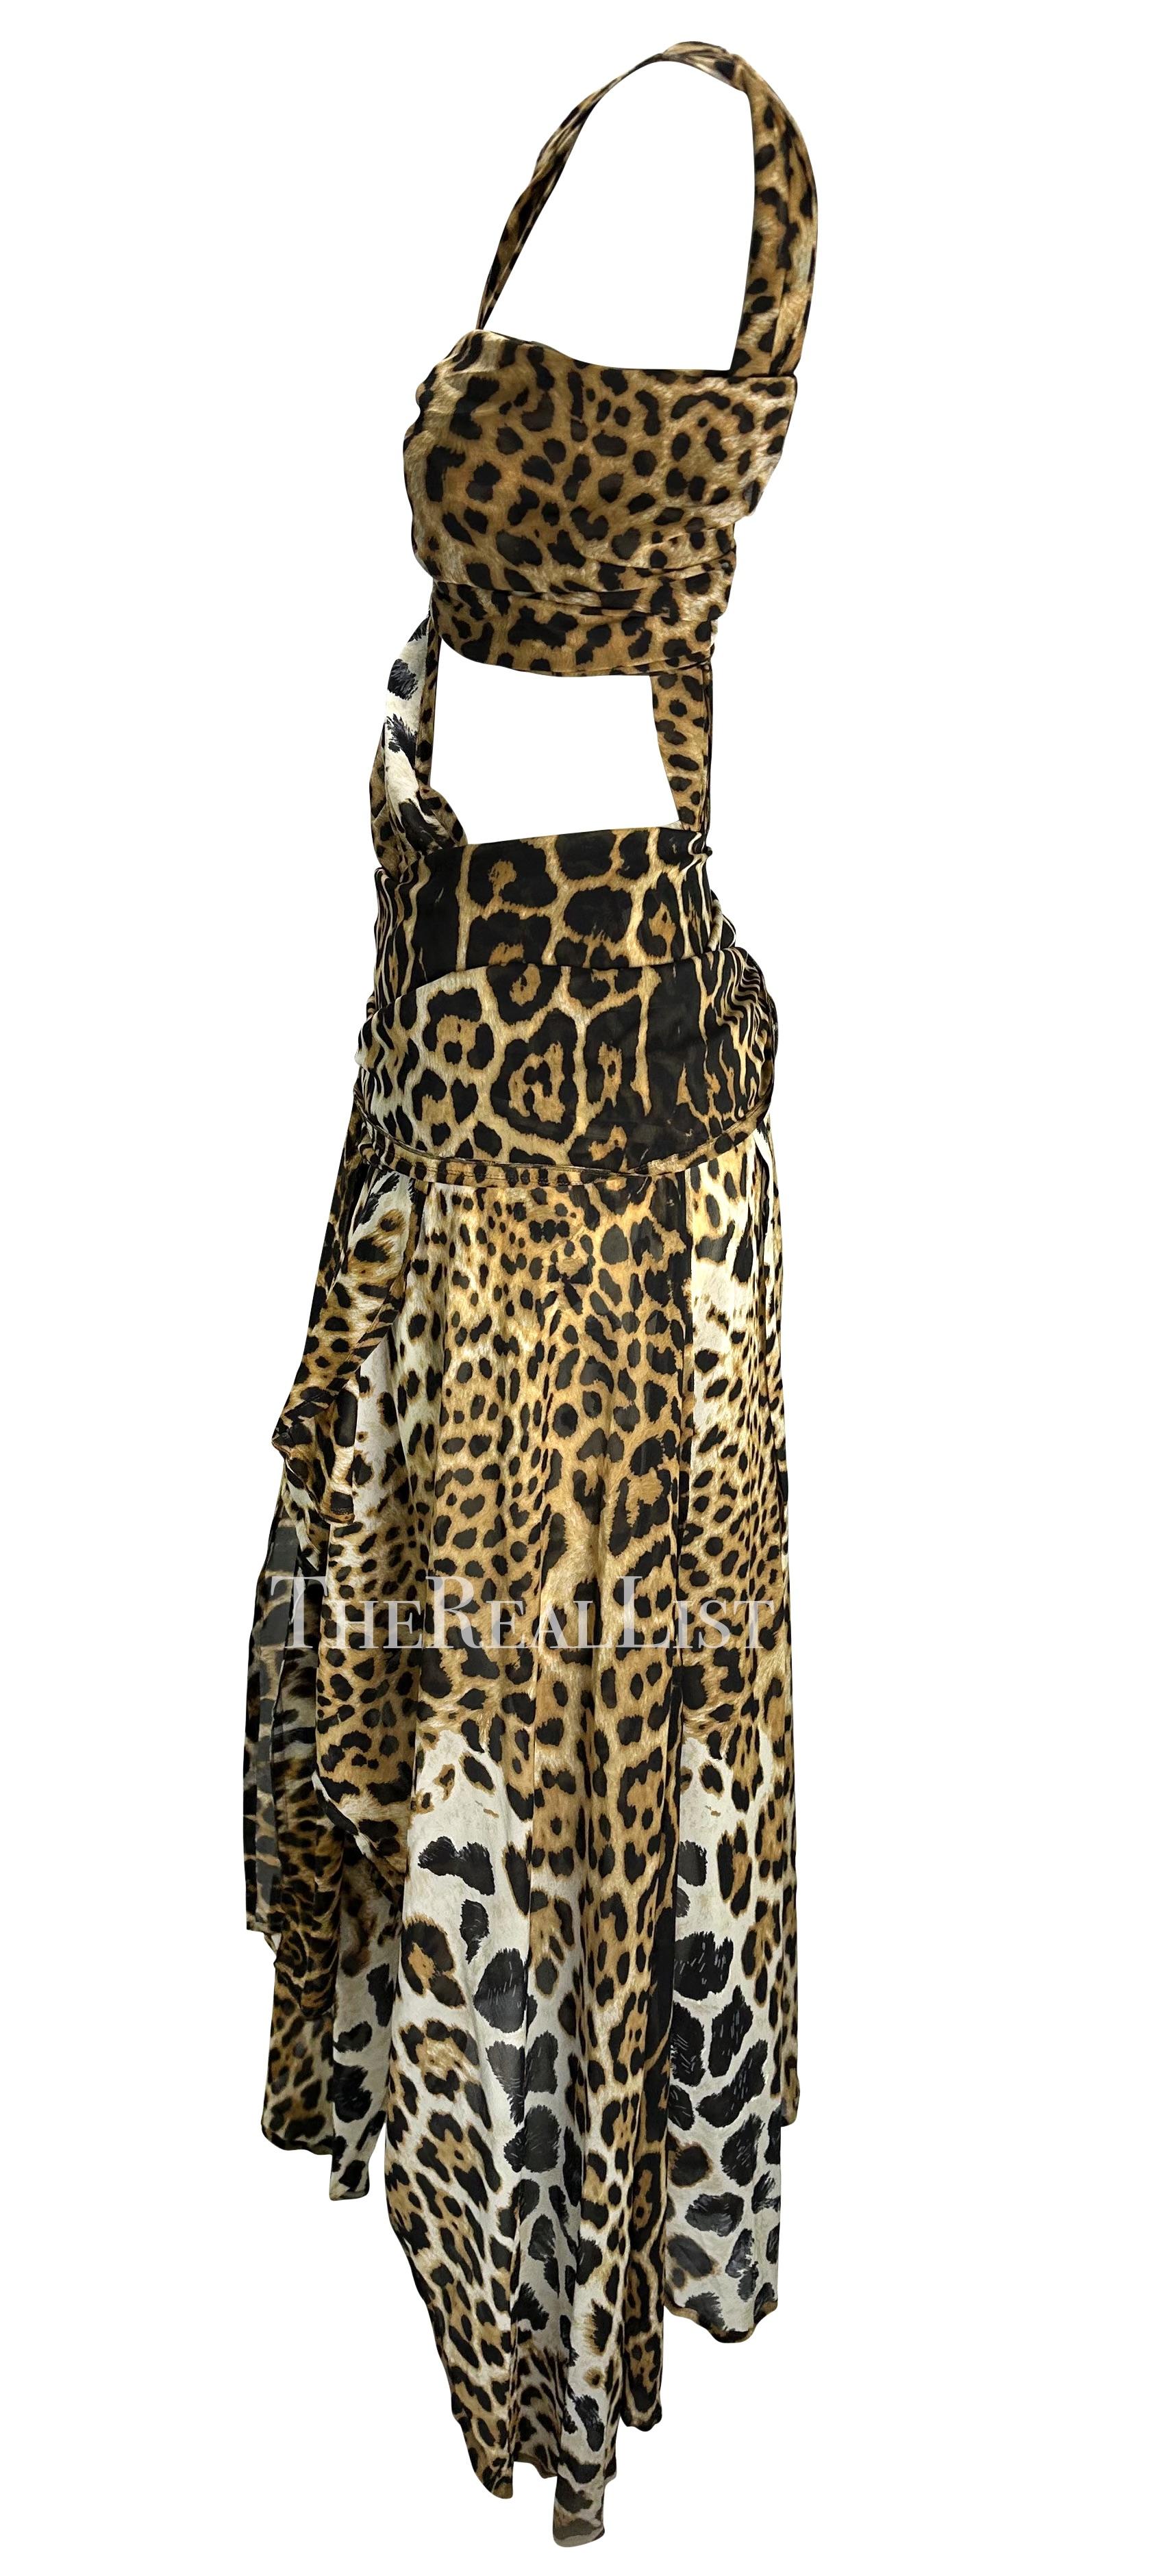 S/S 2002 Yves Saint Laurent by Tom Ford Runway Cheetah Print Chiffon Wrap Gown For Sale 3